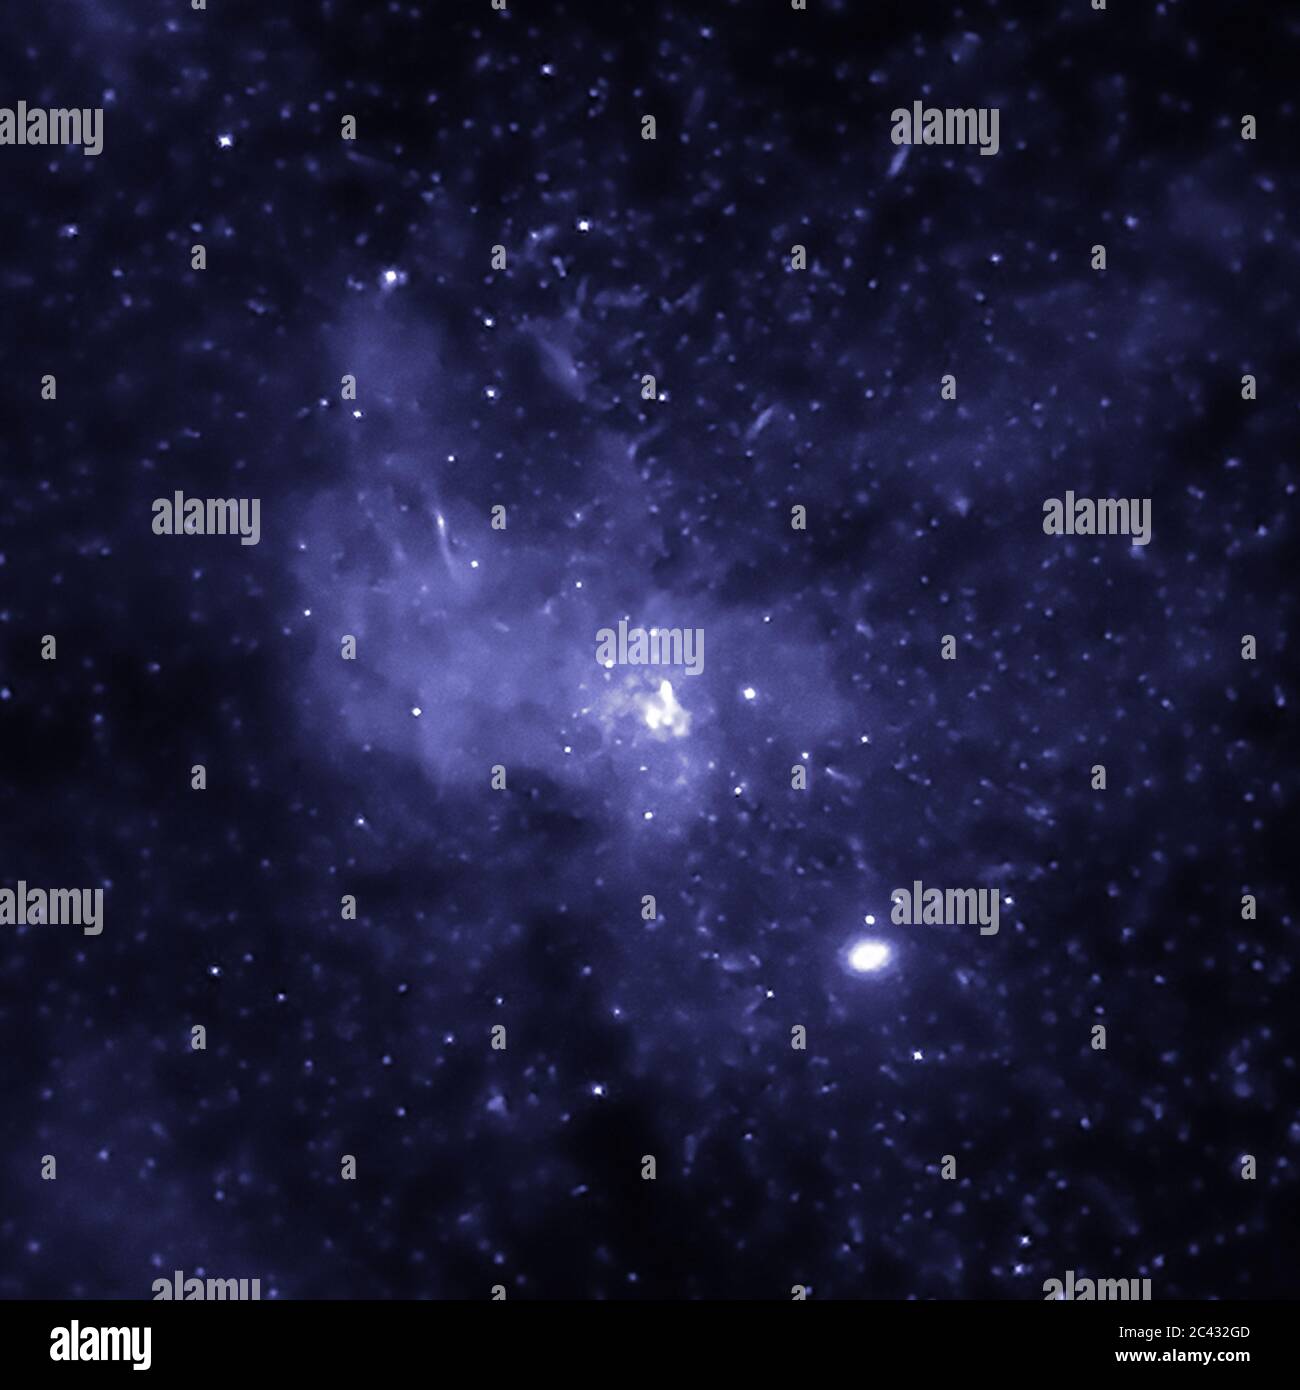 Washington, United States. 23rd June, 2020. Astronomers have discovered evidence for thousands of black holes near the center of our Milky Way galaxy using data from NASA's Chandra X-ray Observatory. This black hole bounty consists of stellar-mass black holes, which typically weigh between five to 30 times the mass of our Sun. These newly identified black holes were found within three light-years, a relatively short distance on cosmic scales, of the supermassive black hole at our Galaxy's center known as Sagittarius A* (Sgr A*). NASA/UPI Credit: UPI/Alamy Live News Stock Photo